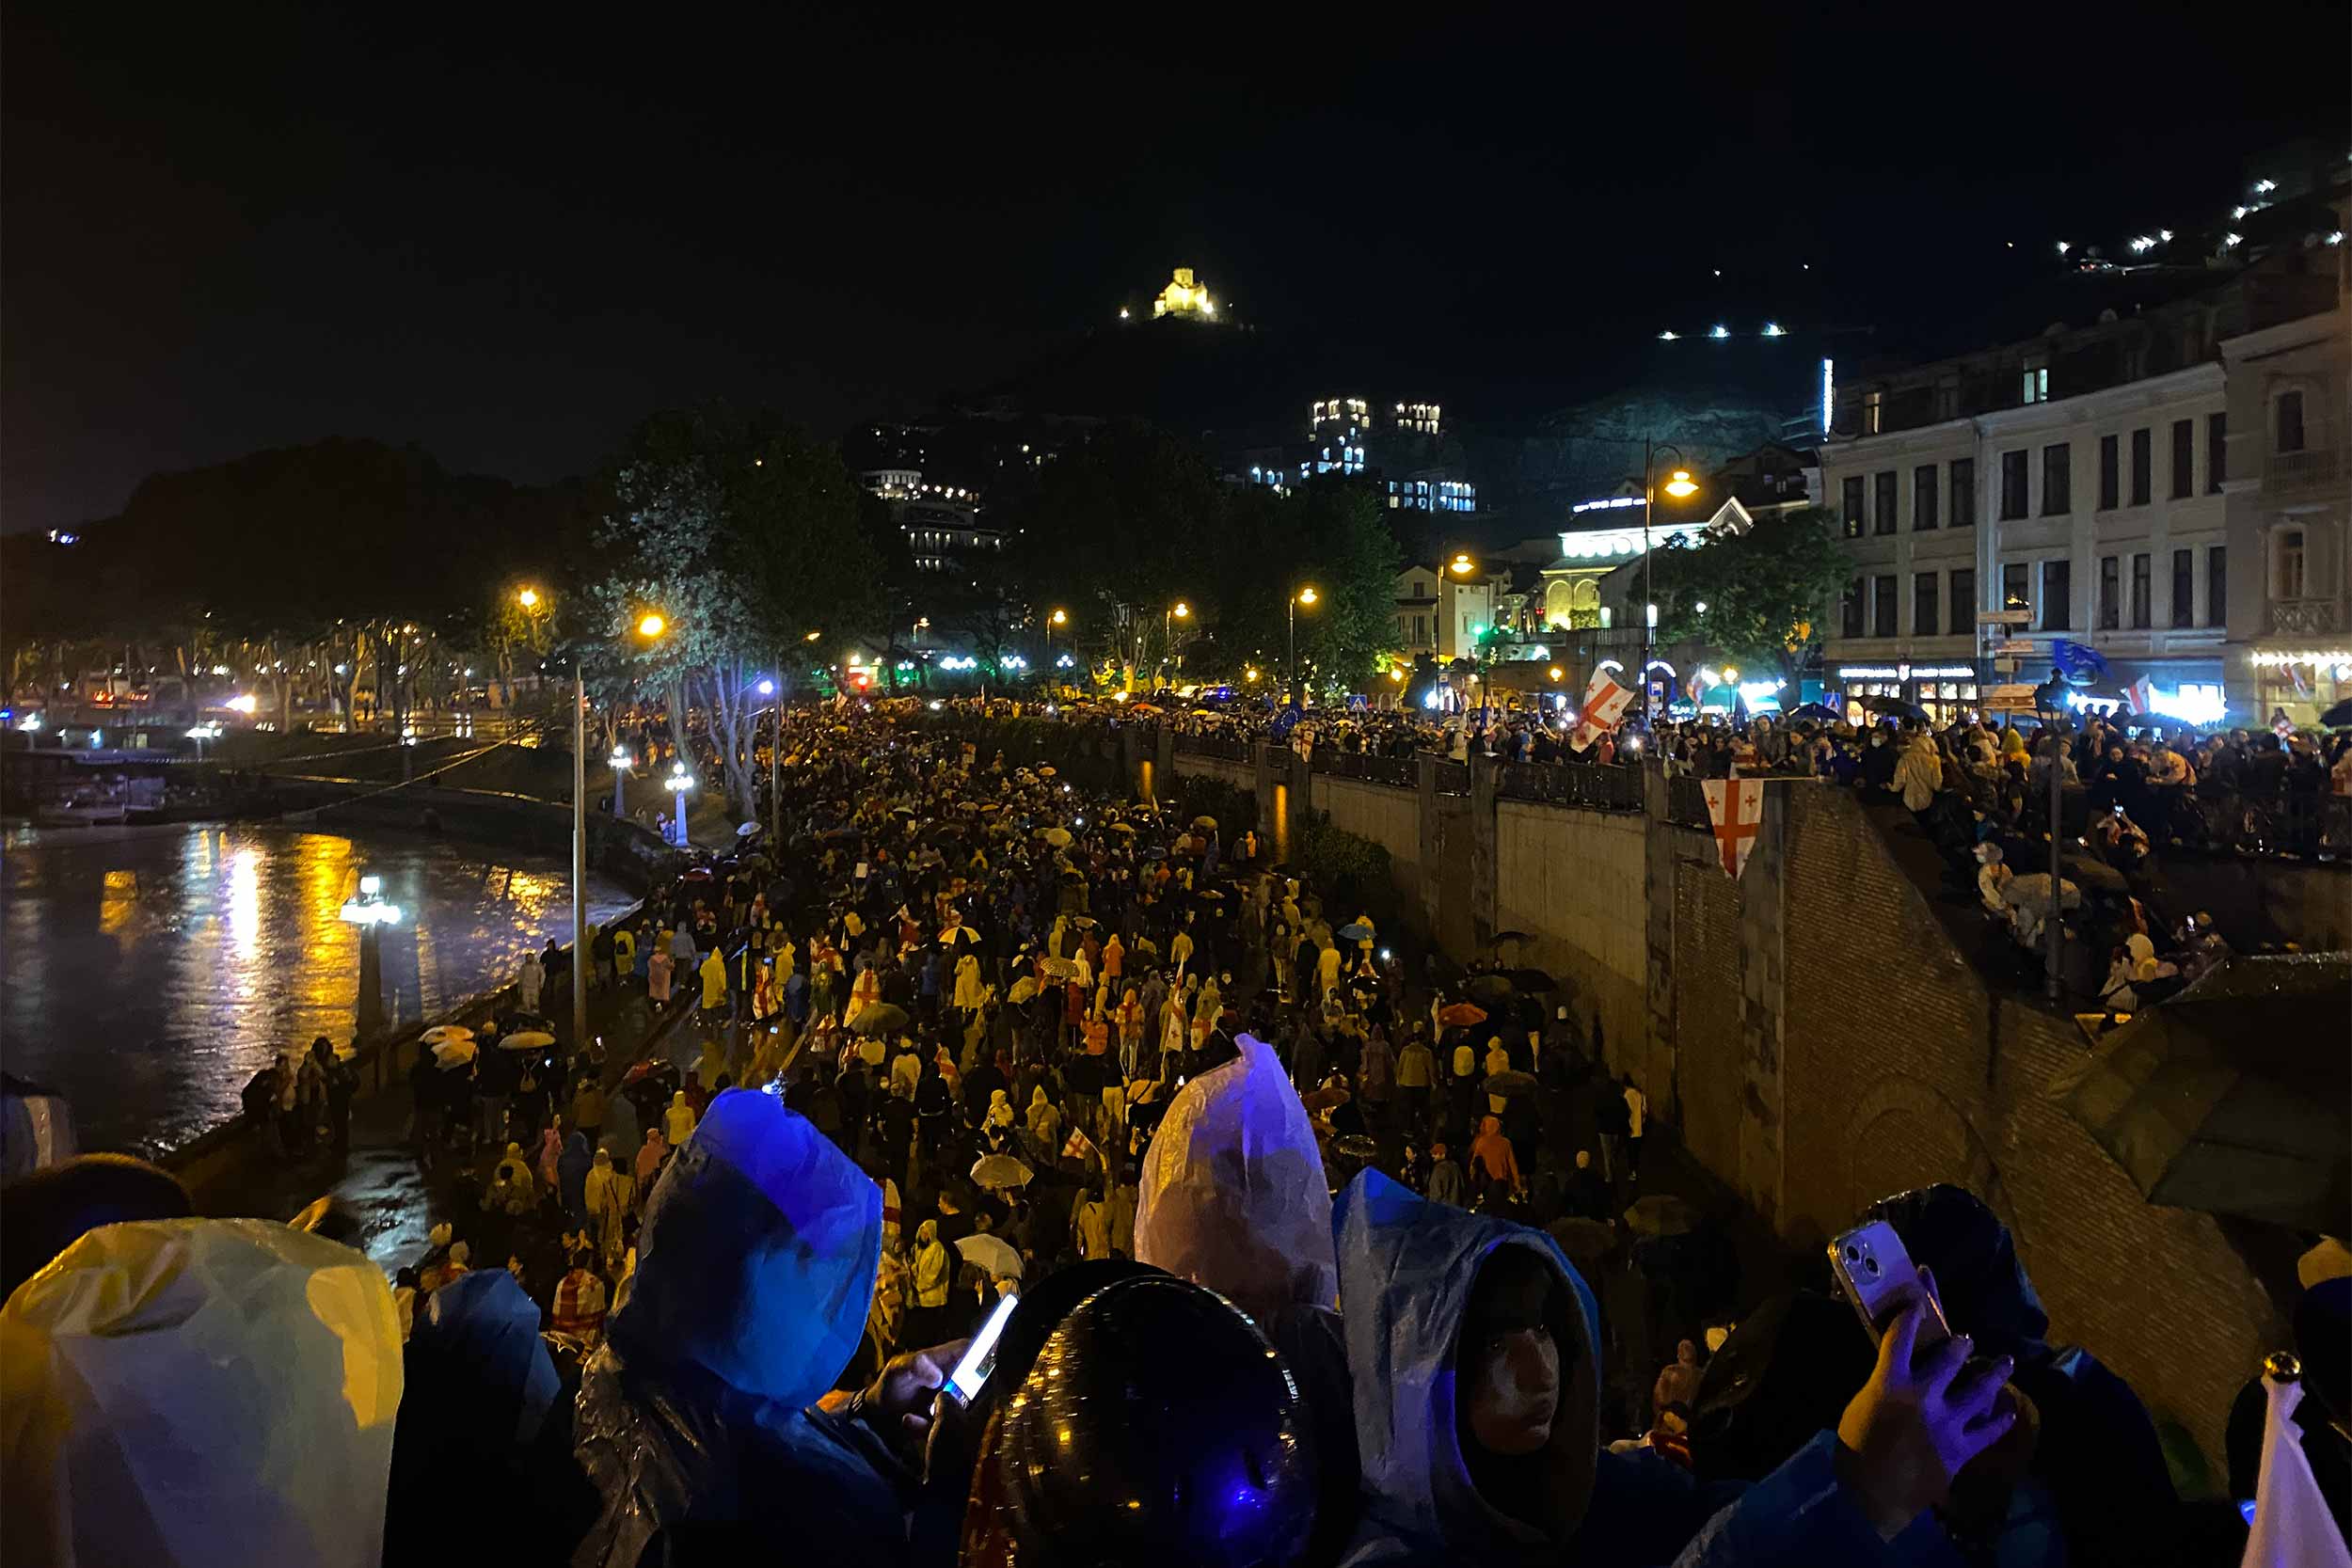 During the European March on May 11 protesting the Russian Law, demonstrators were so numerous that they occupied both banks of the Mtkvari/Kura river in Tbilisi. © Beka Bajelidze